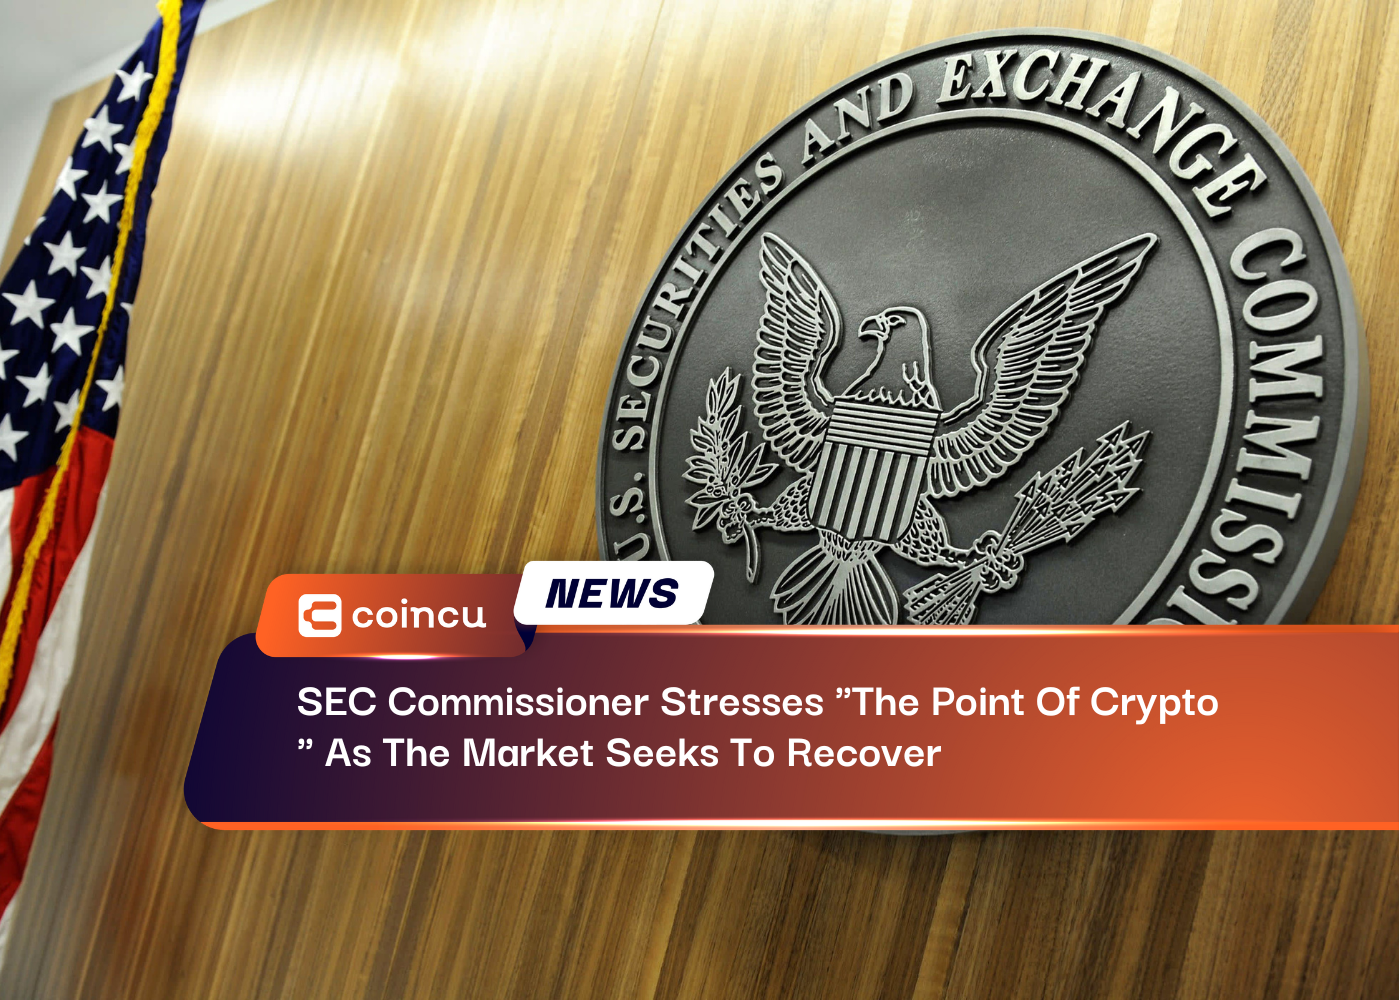 SEC Commissioner Stresses The Point Of Crypto